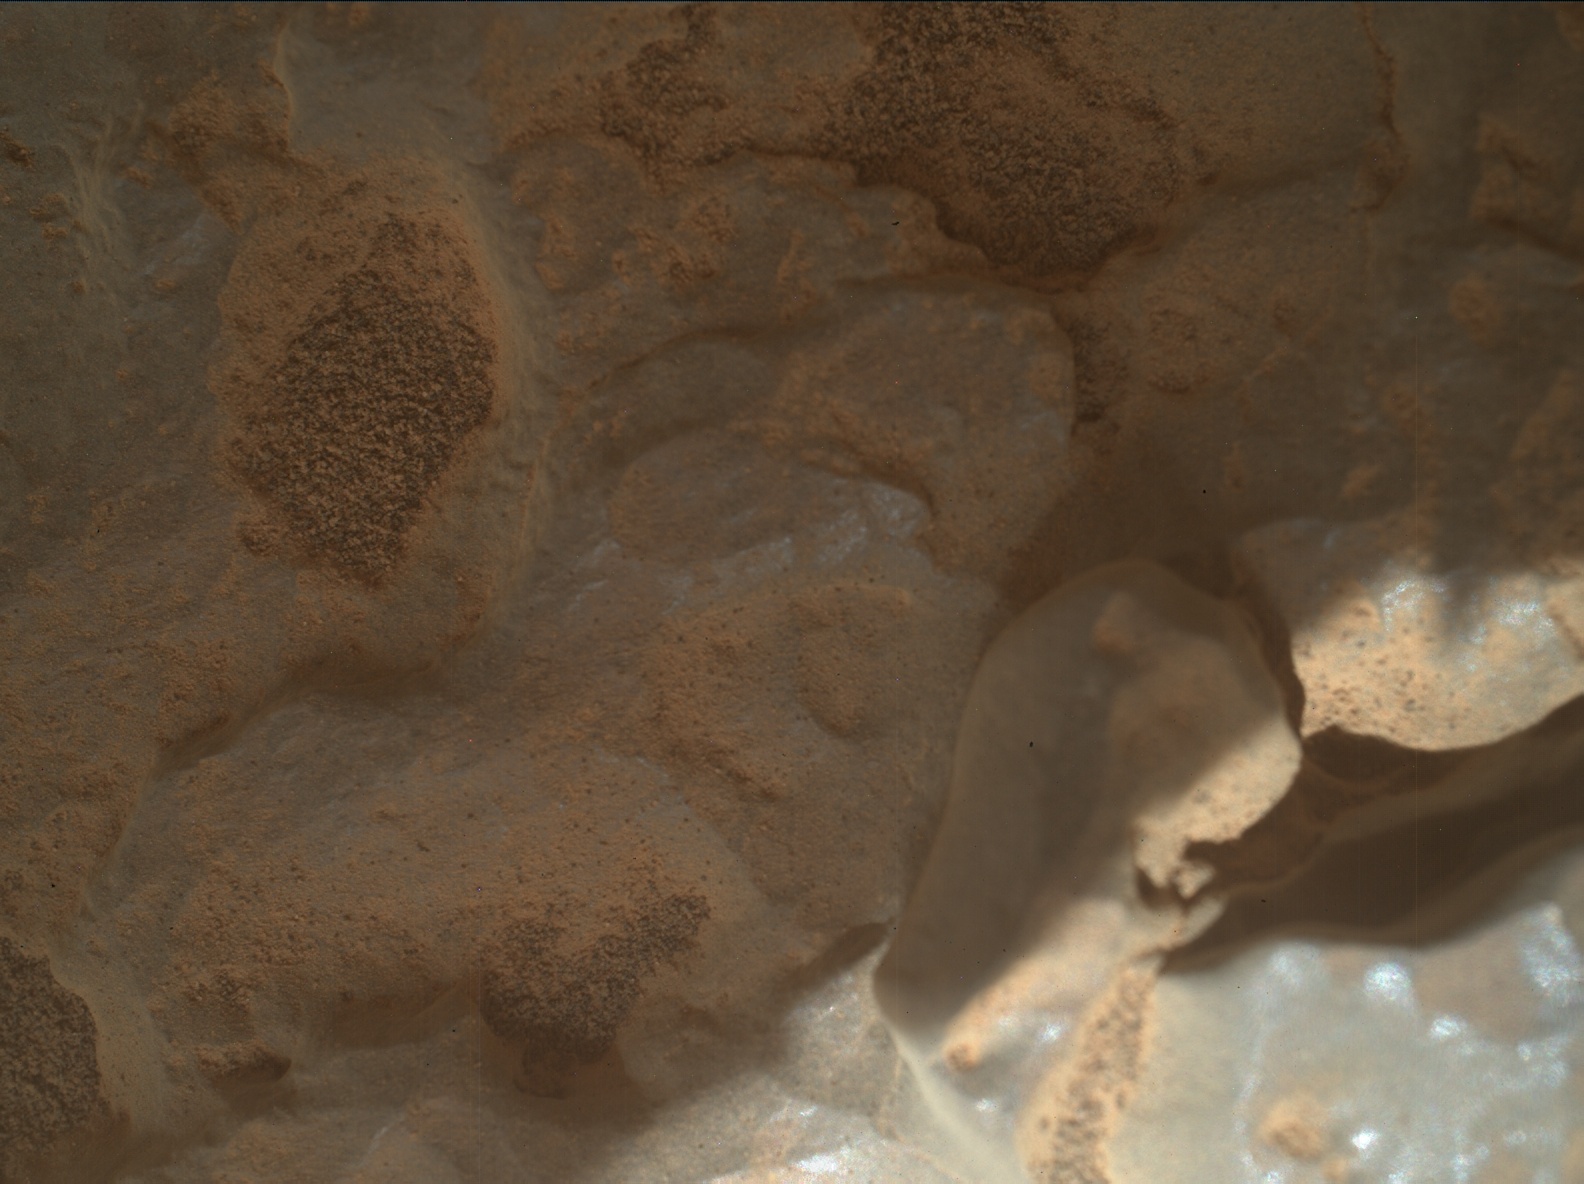 Nasa's Mars rover Curiosity acquired this image using its Mars Hand Lens Imager (MAHLI) on Sol 3921